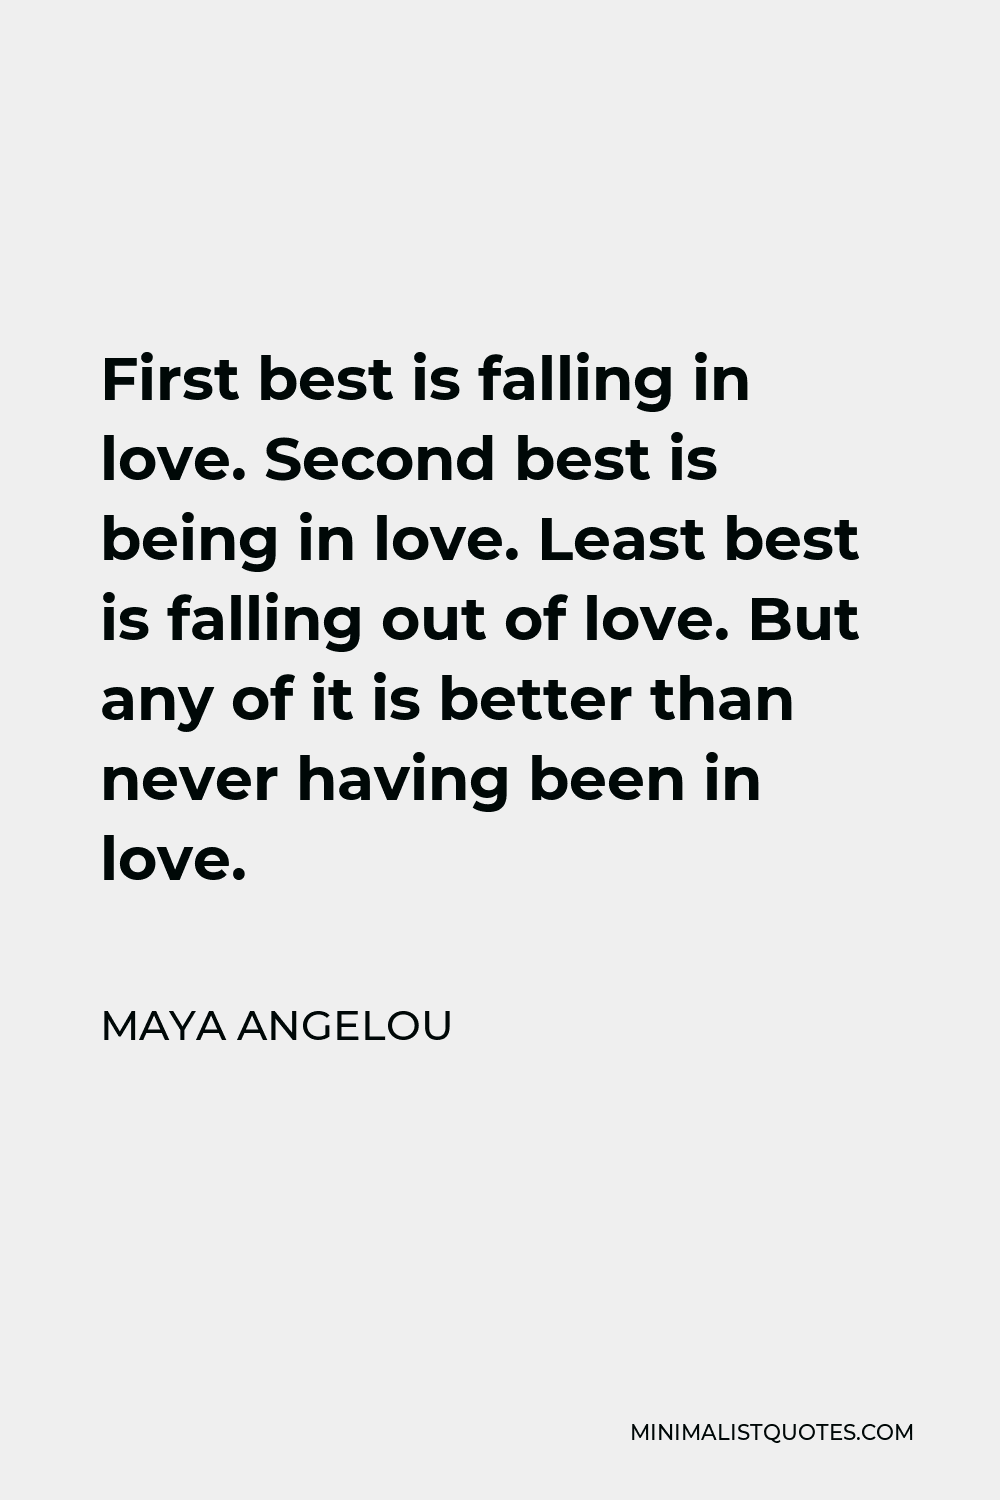 Maya Angelou Quote - First best is falling in love. Second best is being in love. Least best is falling out of love. But any of it is better than never having been in love.